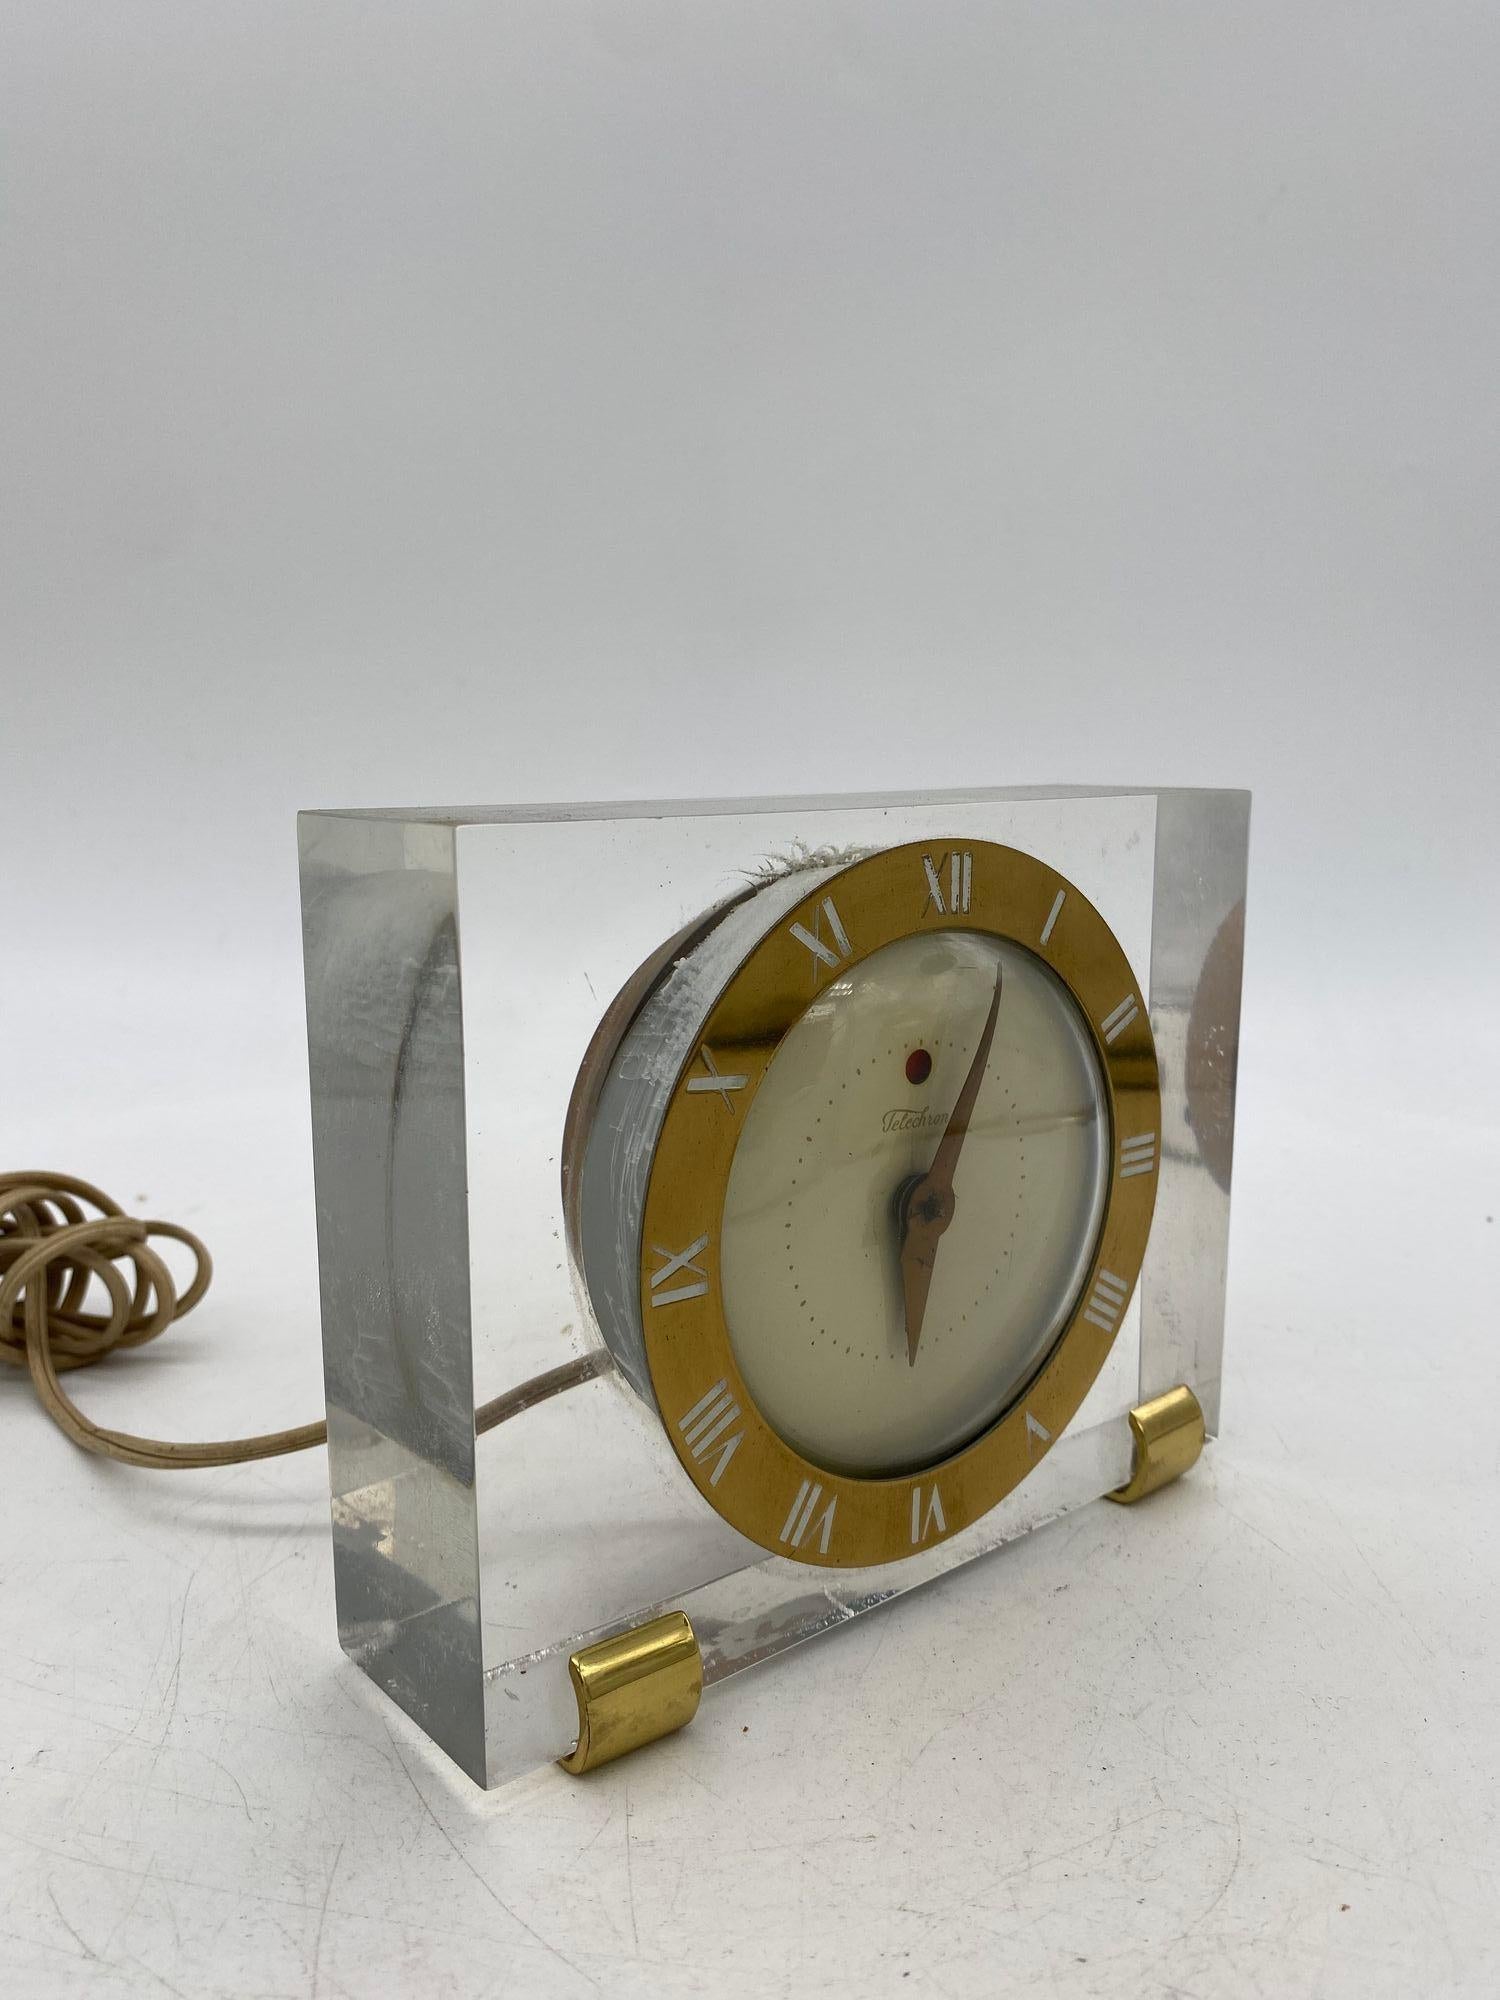 Rare Lucite and brass Telechron Model 7H141 Electric desk clock featuring a brass face with a bubble glass front fitted inside a highly polished square acrylic block with brass feet.

Measures 5 1/2 inches tall
7 1/2 inches across
2 1/4 inches